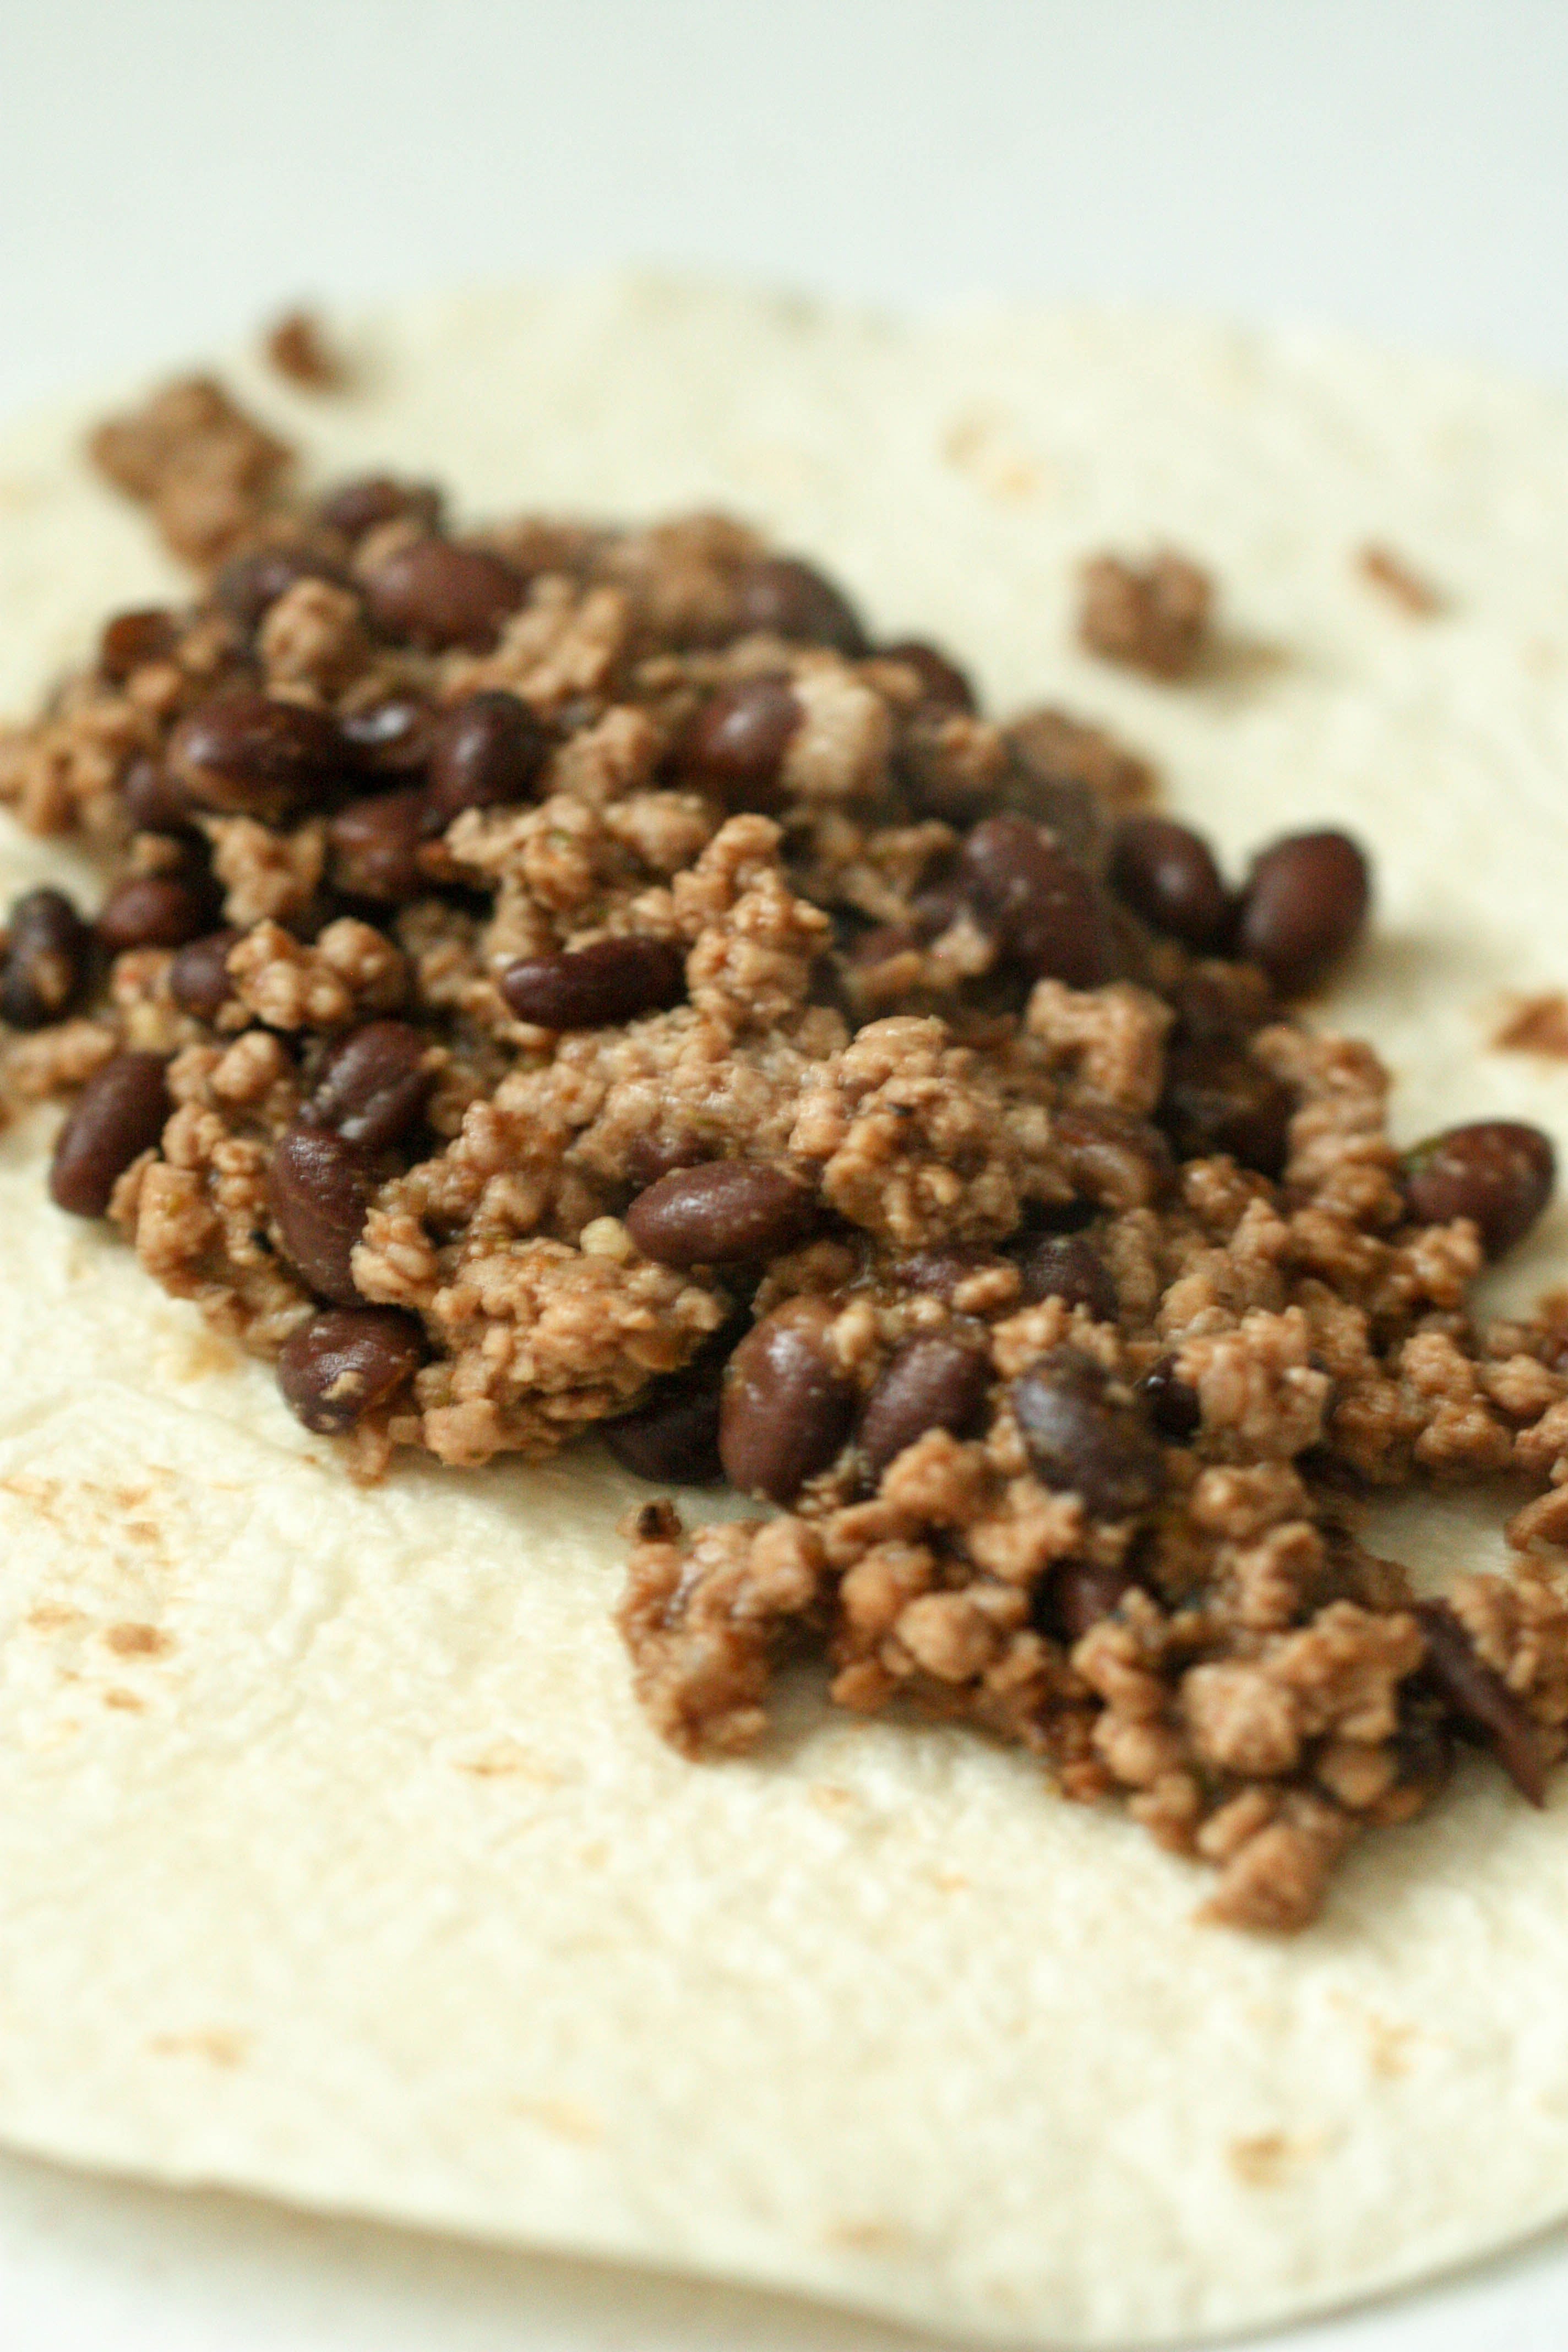 Tortilla with ground turkey and black beans in the center